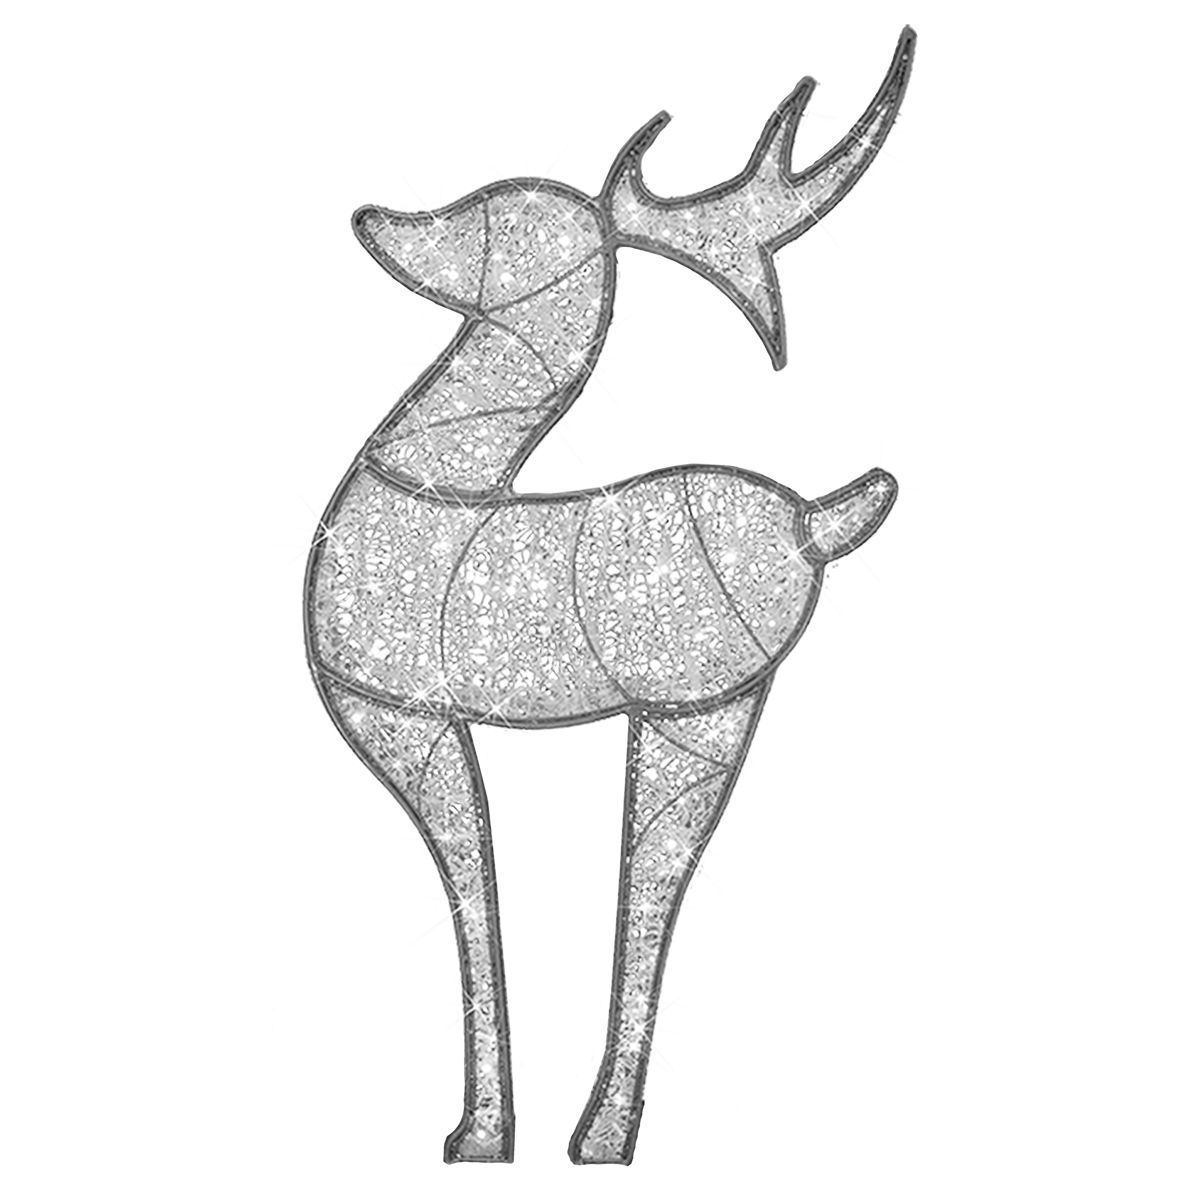 2D Deer Christmas Display - Cool White LEDs - Silver - Large - 9ft tall